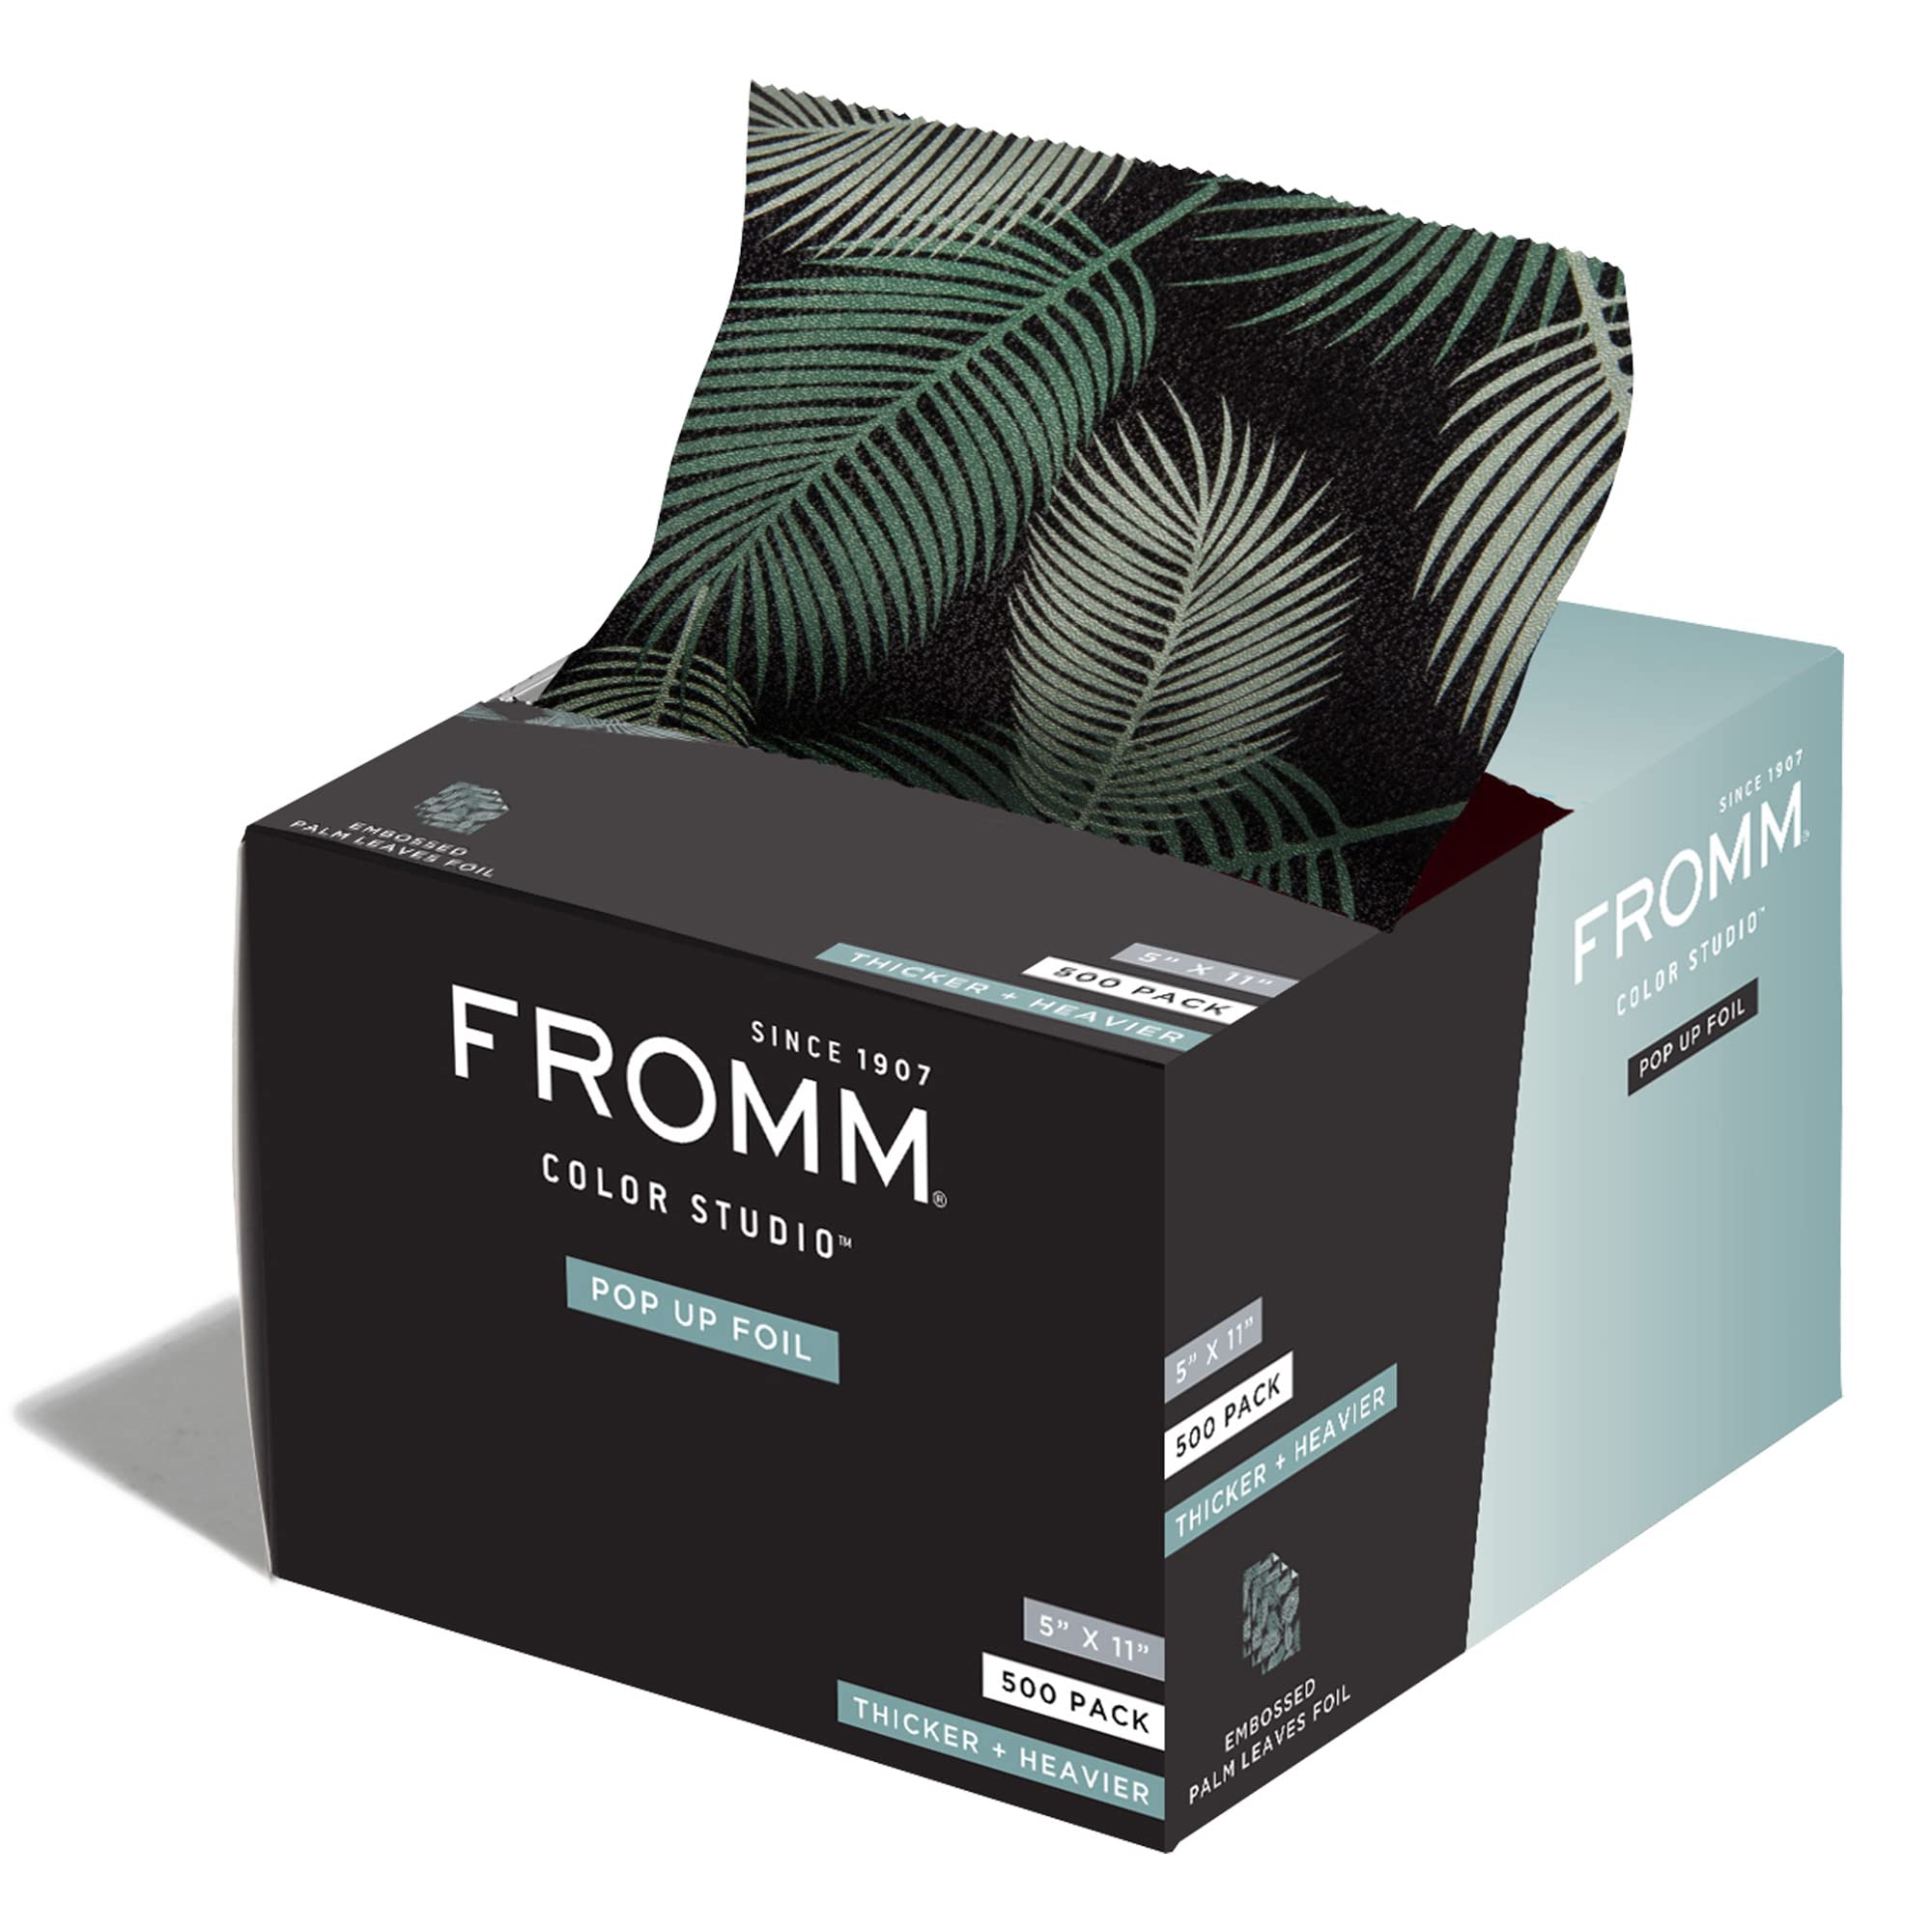 Fromm Color Studio Pop Up Hair Foil in Palms Leaves Pattern, 5